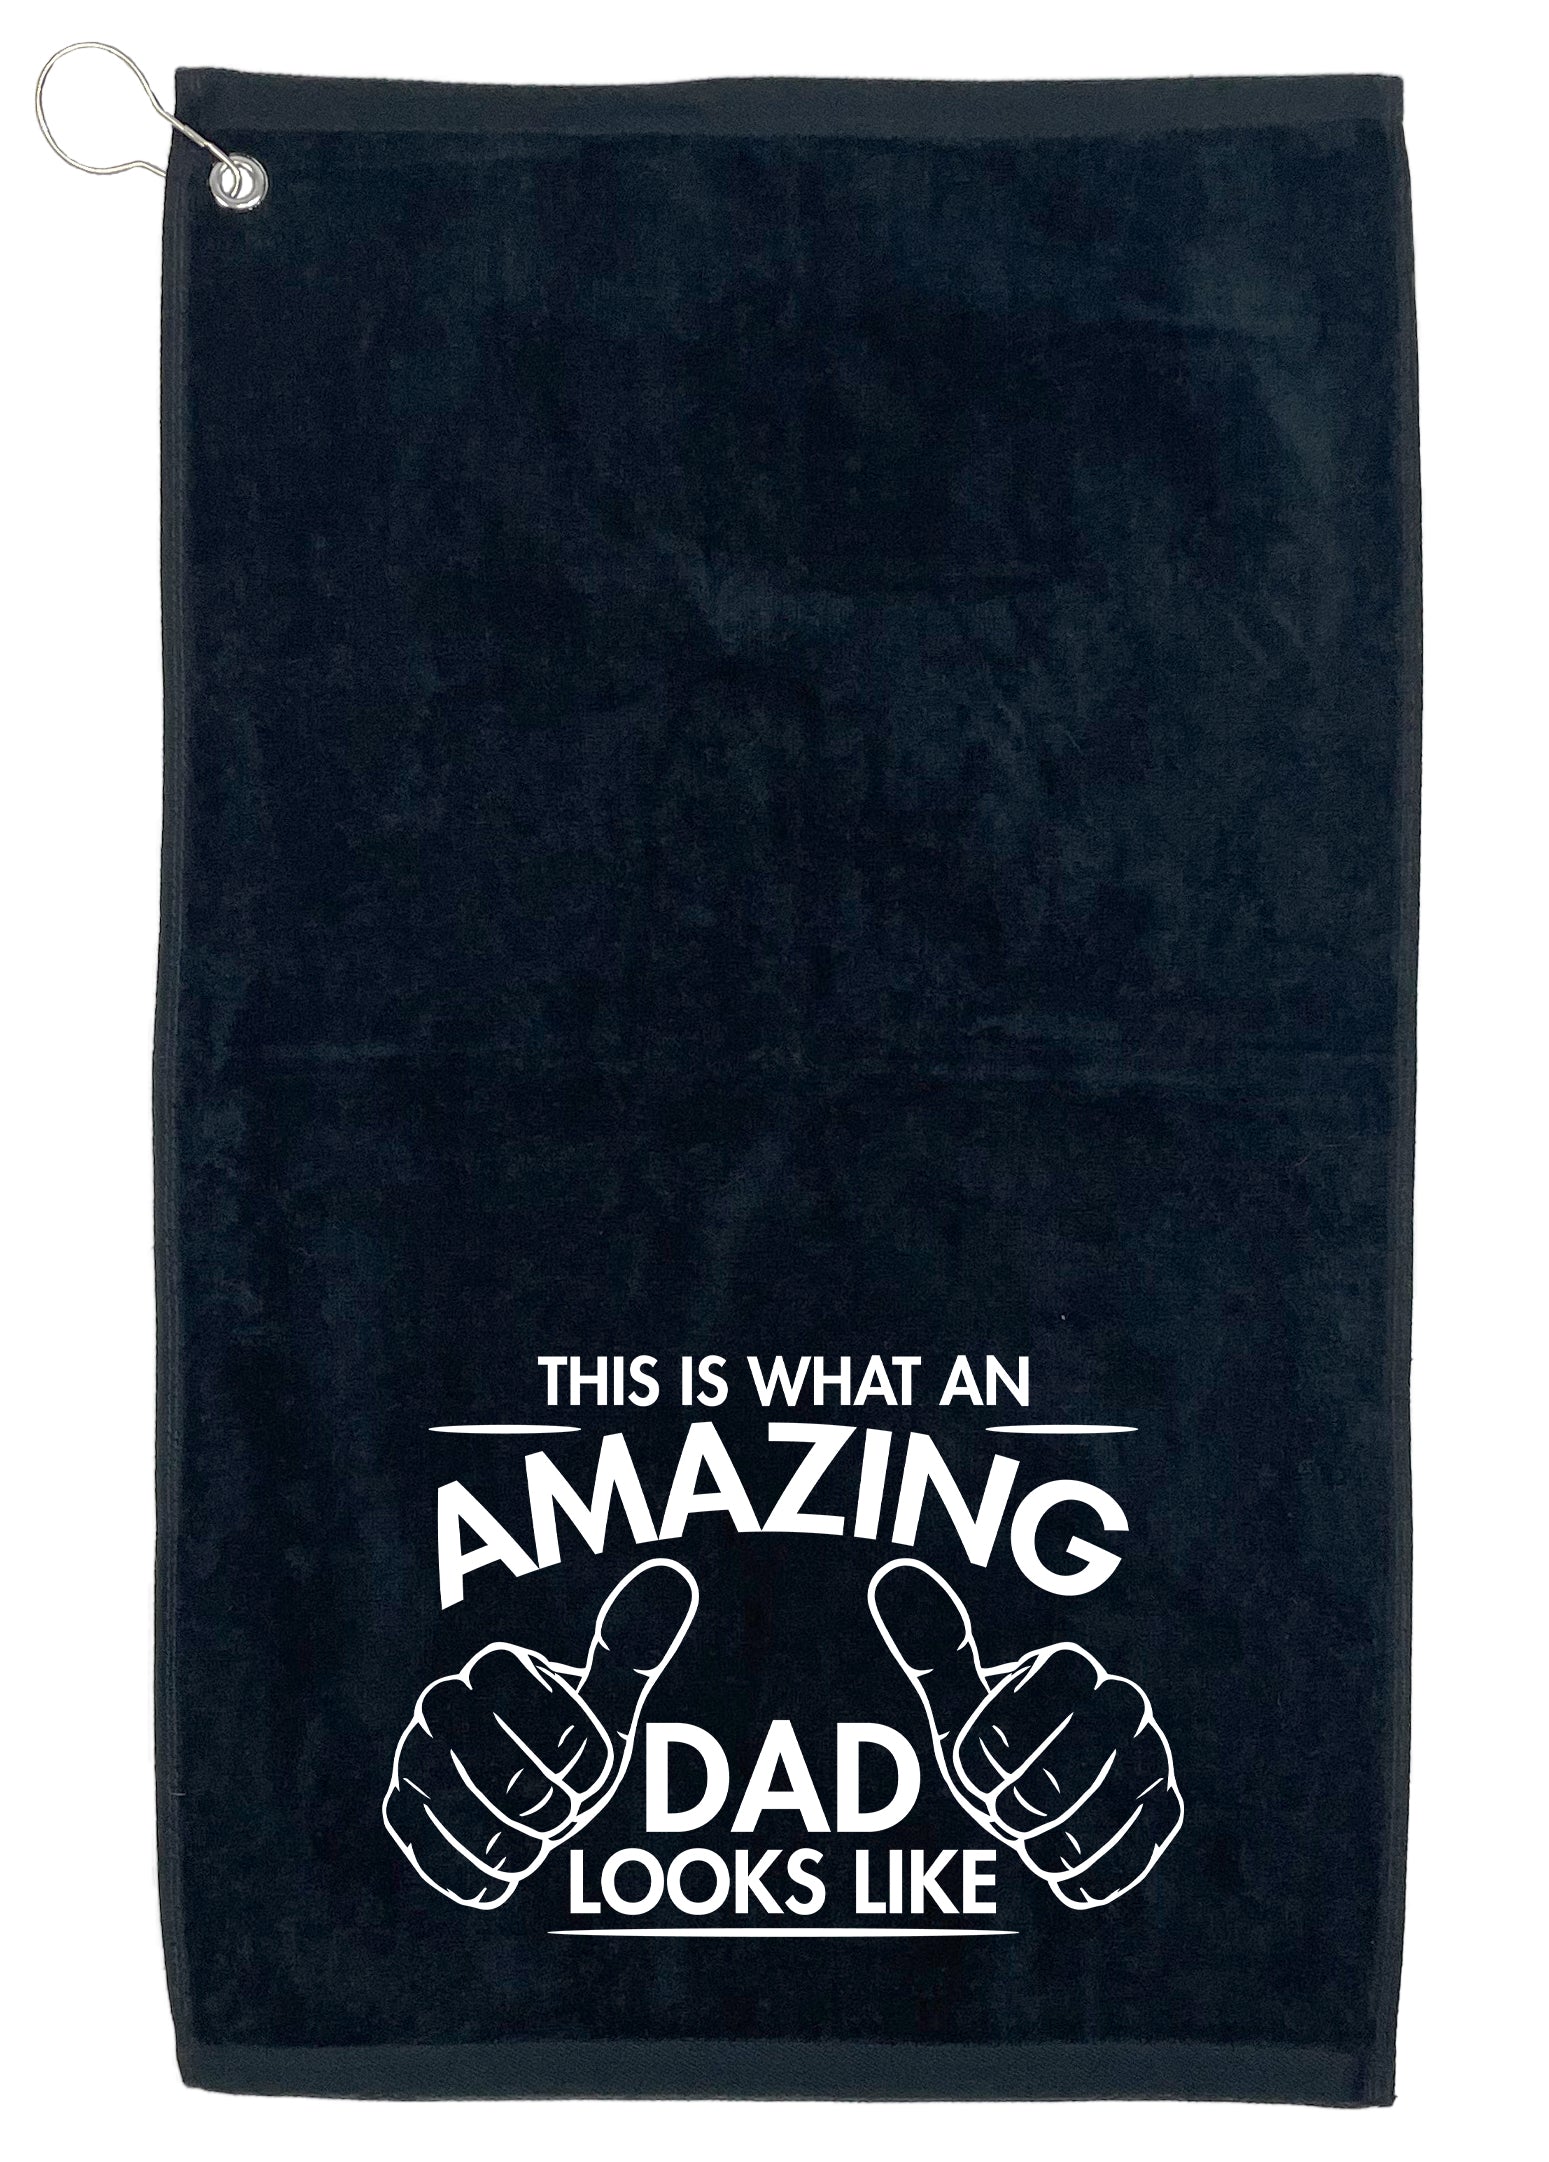 This Is What An Amzaing Dad Looks Like, Golf Towel